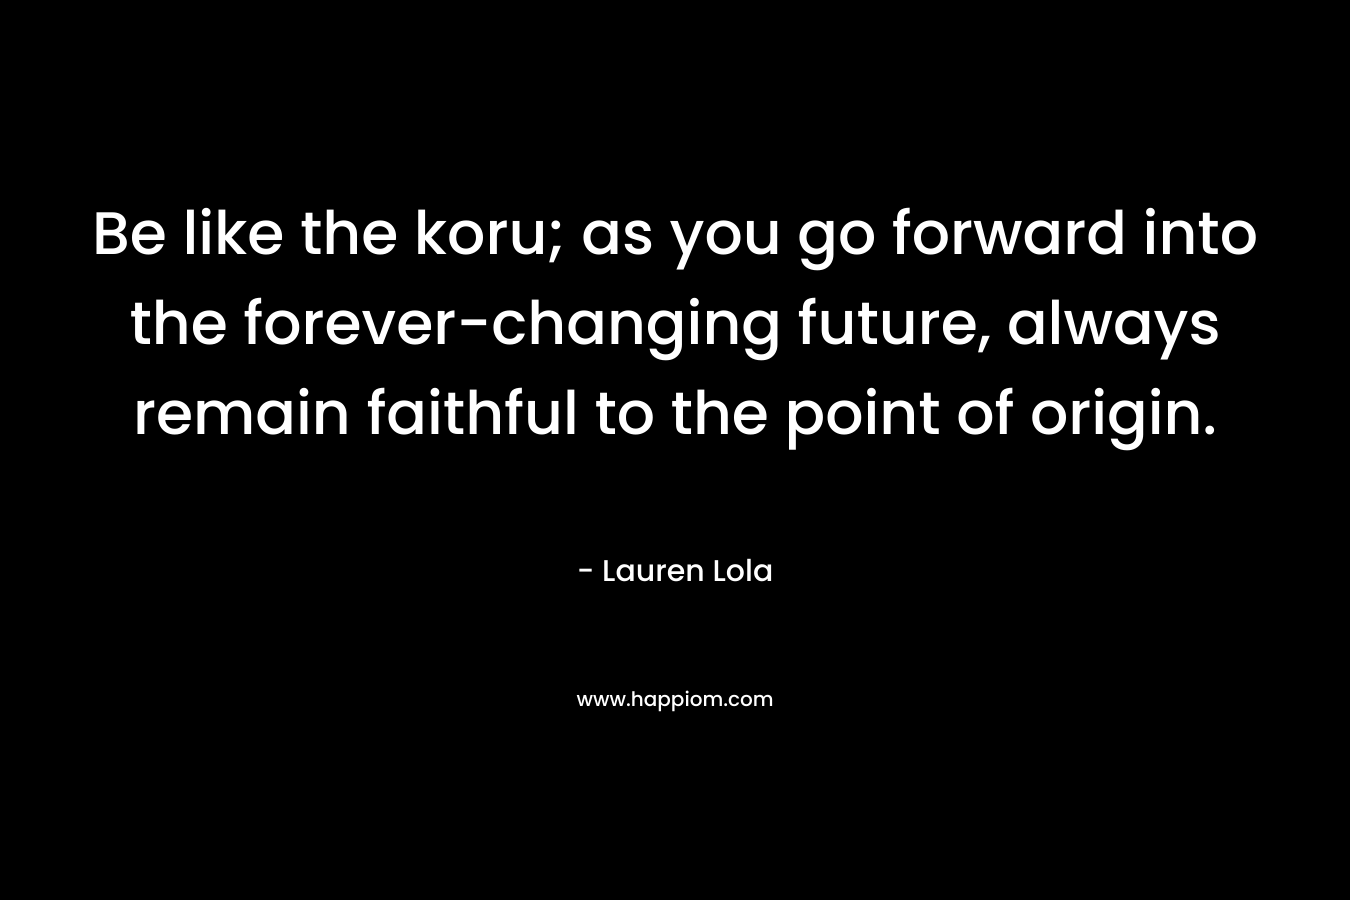 Be like the koru; as you go forward into the forever-changing future, always remain faithful to the point of origin. – Lauren Lola